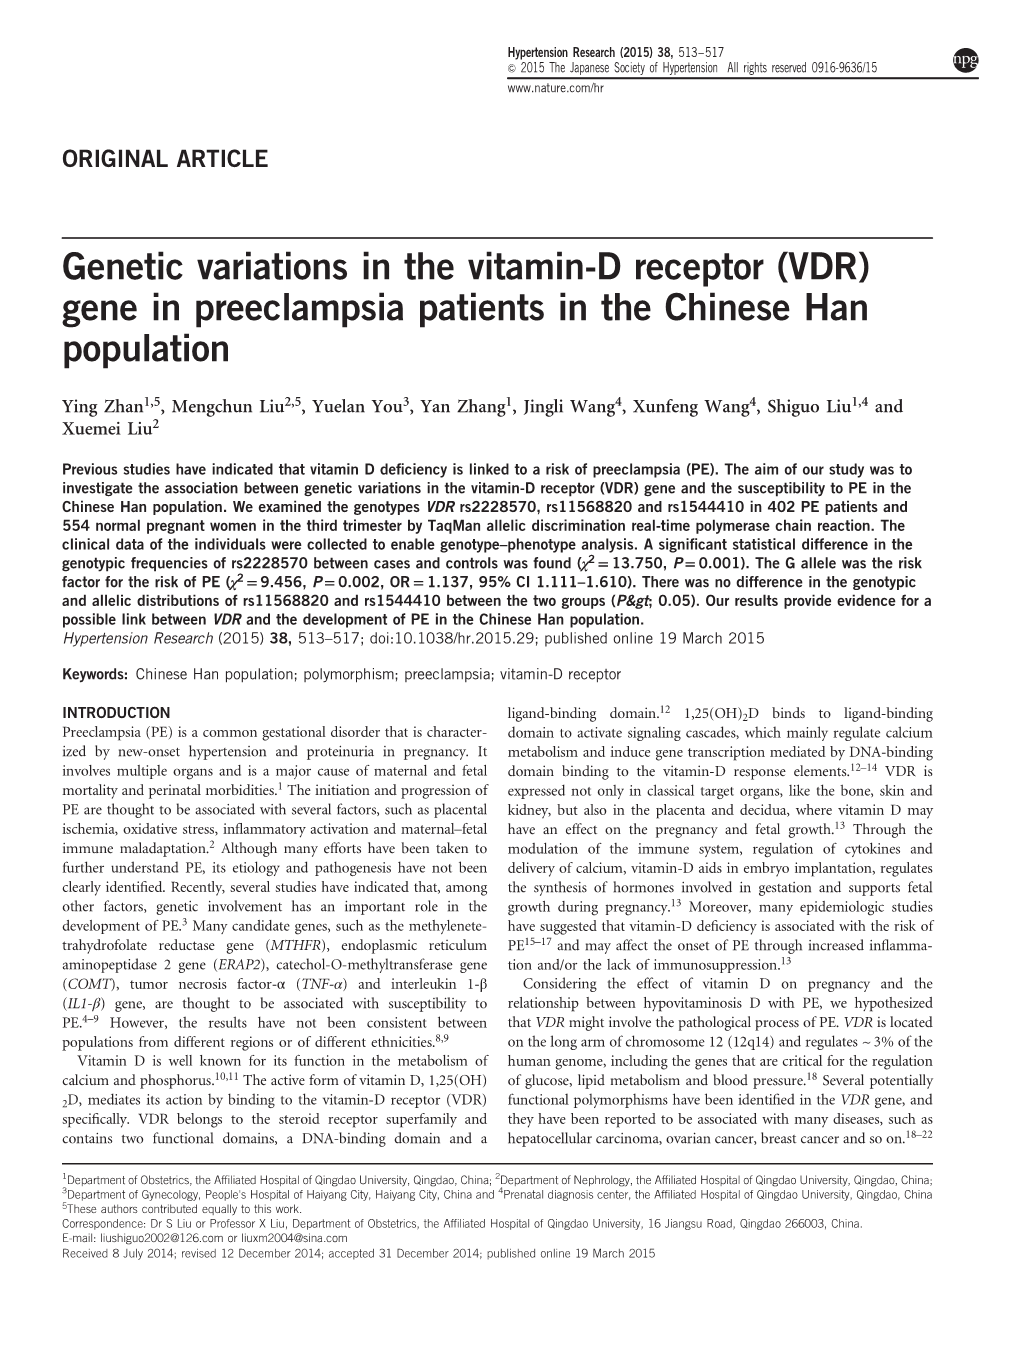 VDR) Gene in Preeclampsia Patients in the Chinese Han Population